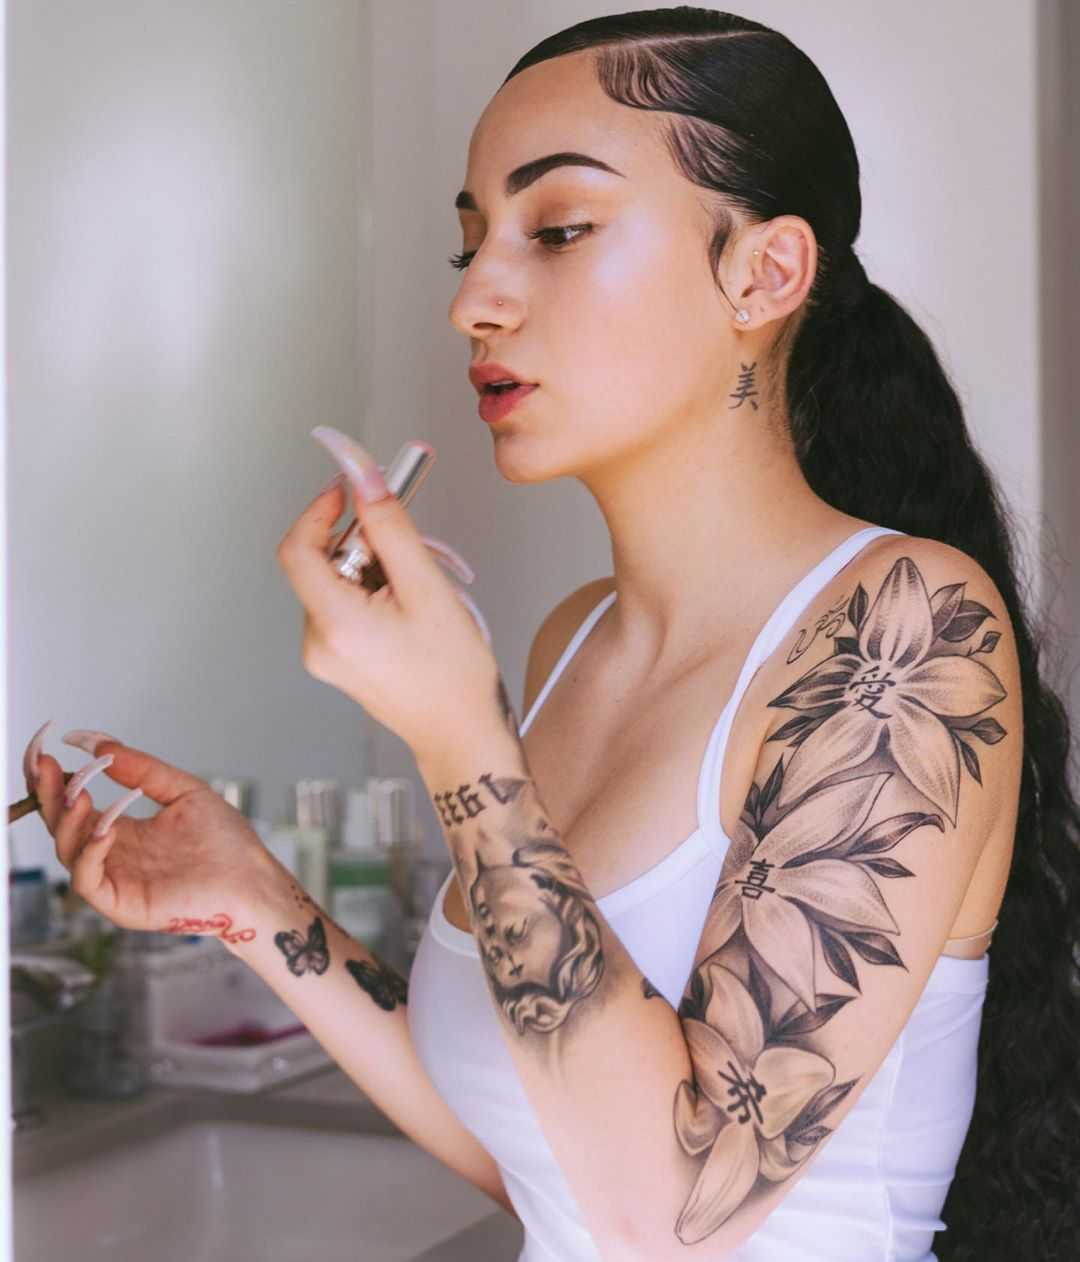 70+ Hot Pictures Of Danielle Bregoli aka Bhad Bhabie Which Will Win Your Heart 270